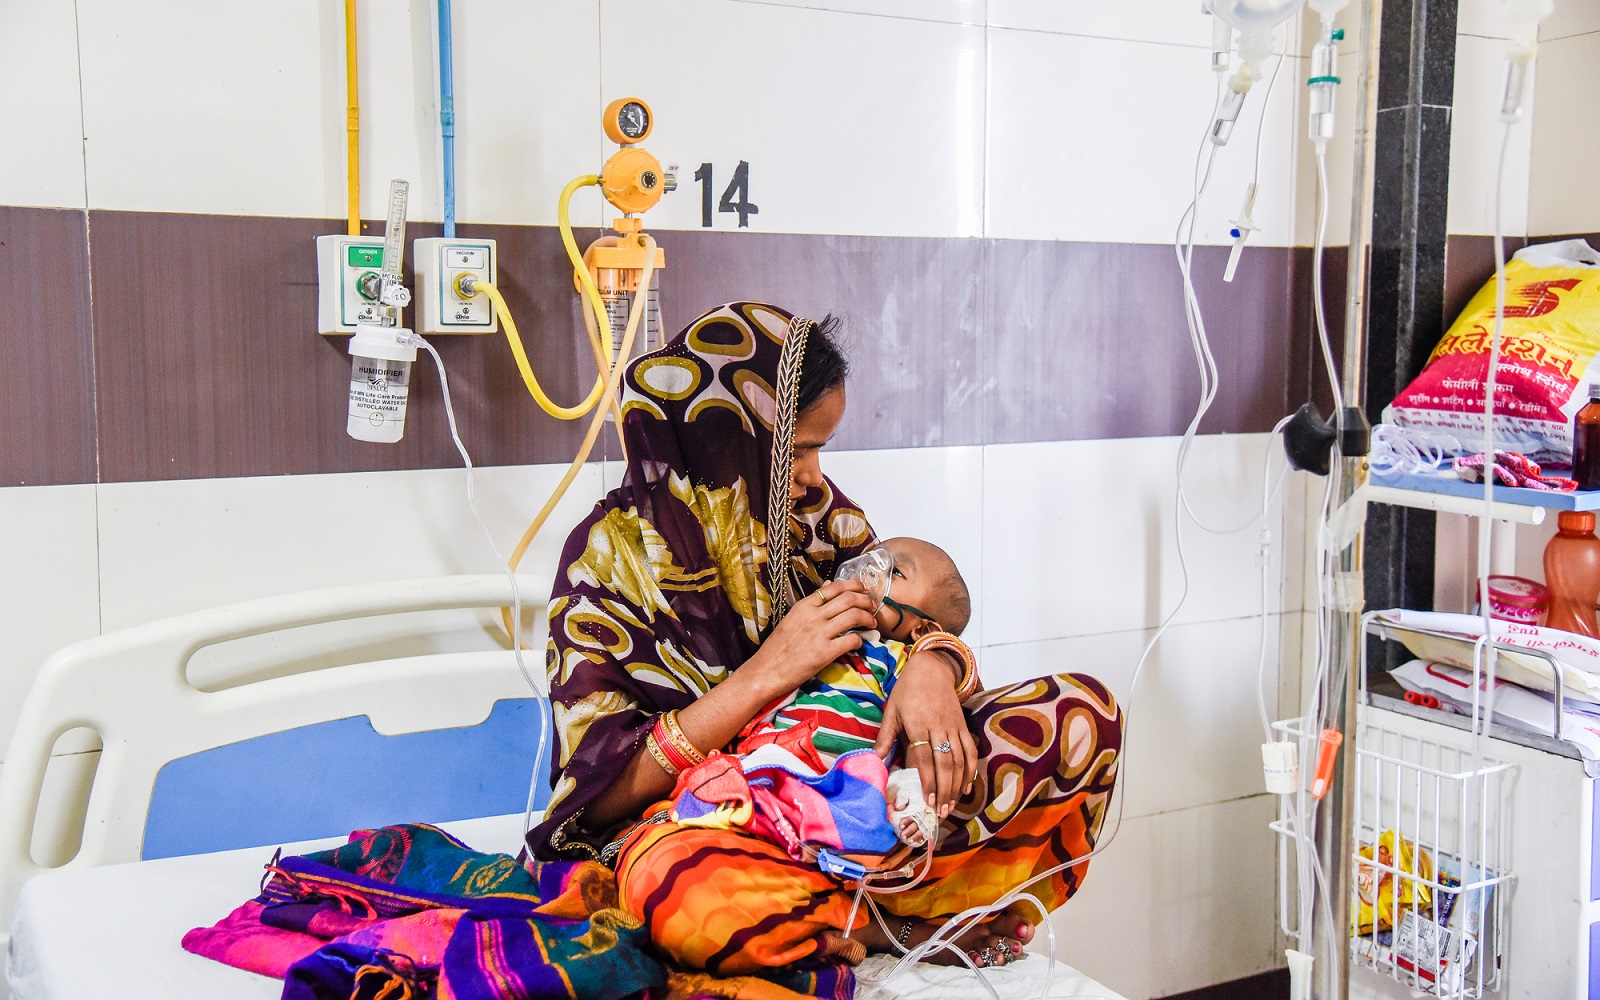 A 7-month-old suffering from pneumonia is taken care of by his mother in the pediatric ward at King George's Medical University, Lucknow, India, September 19, 2018.